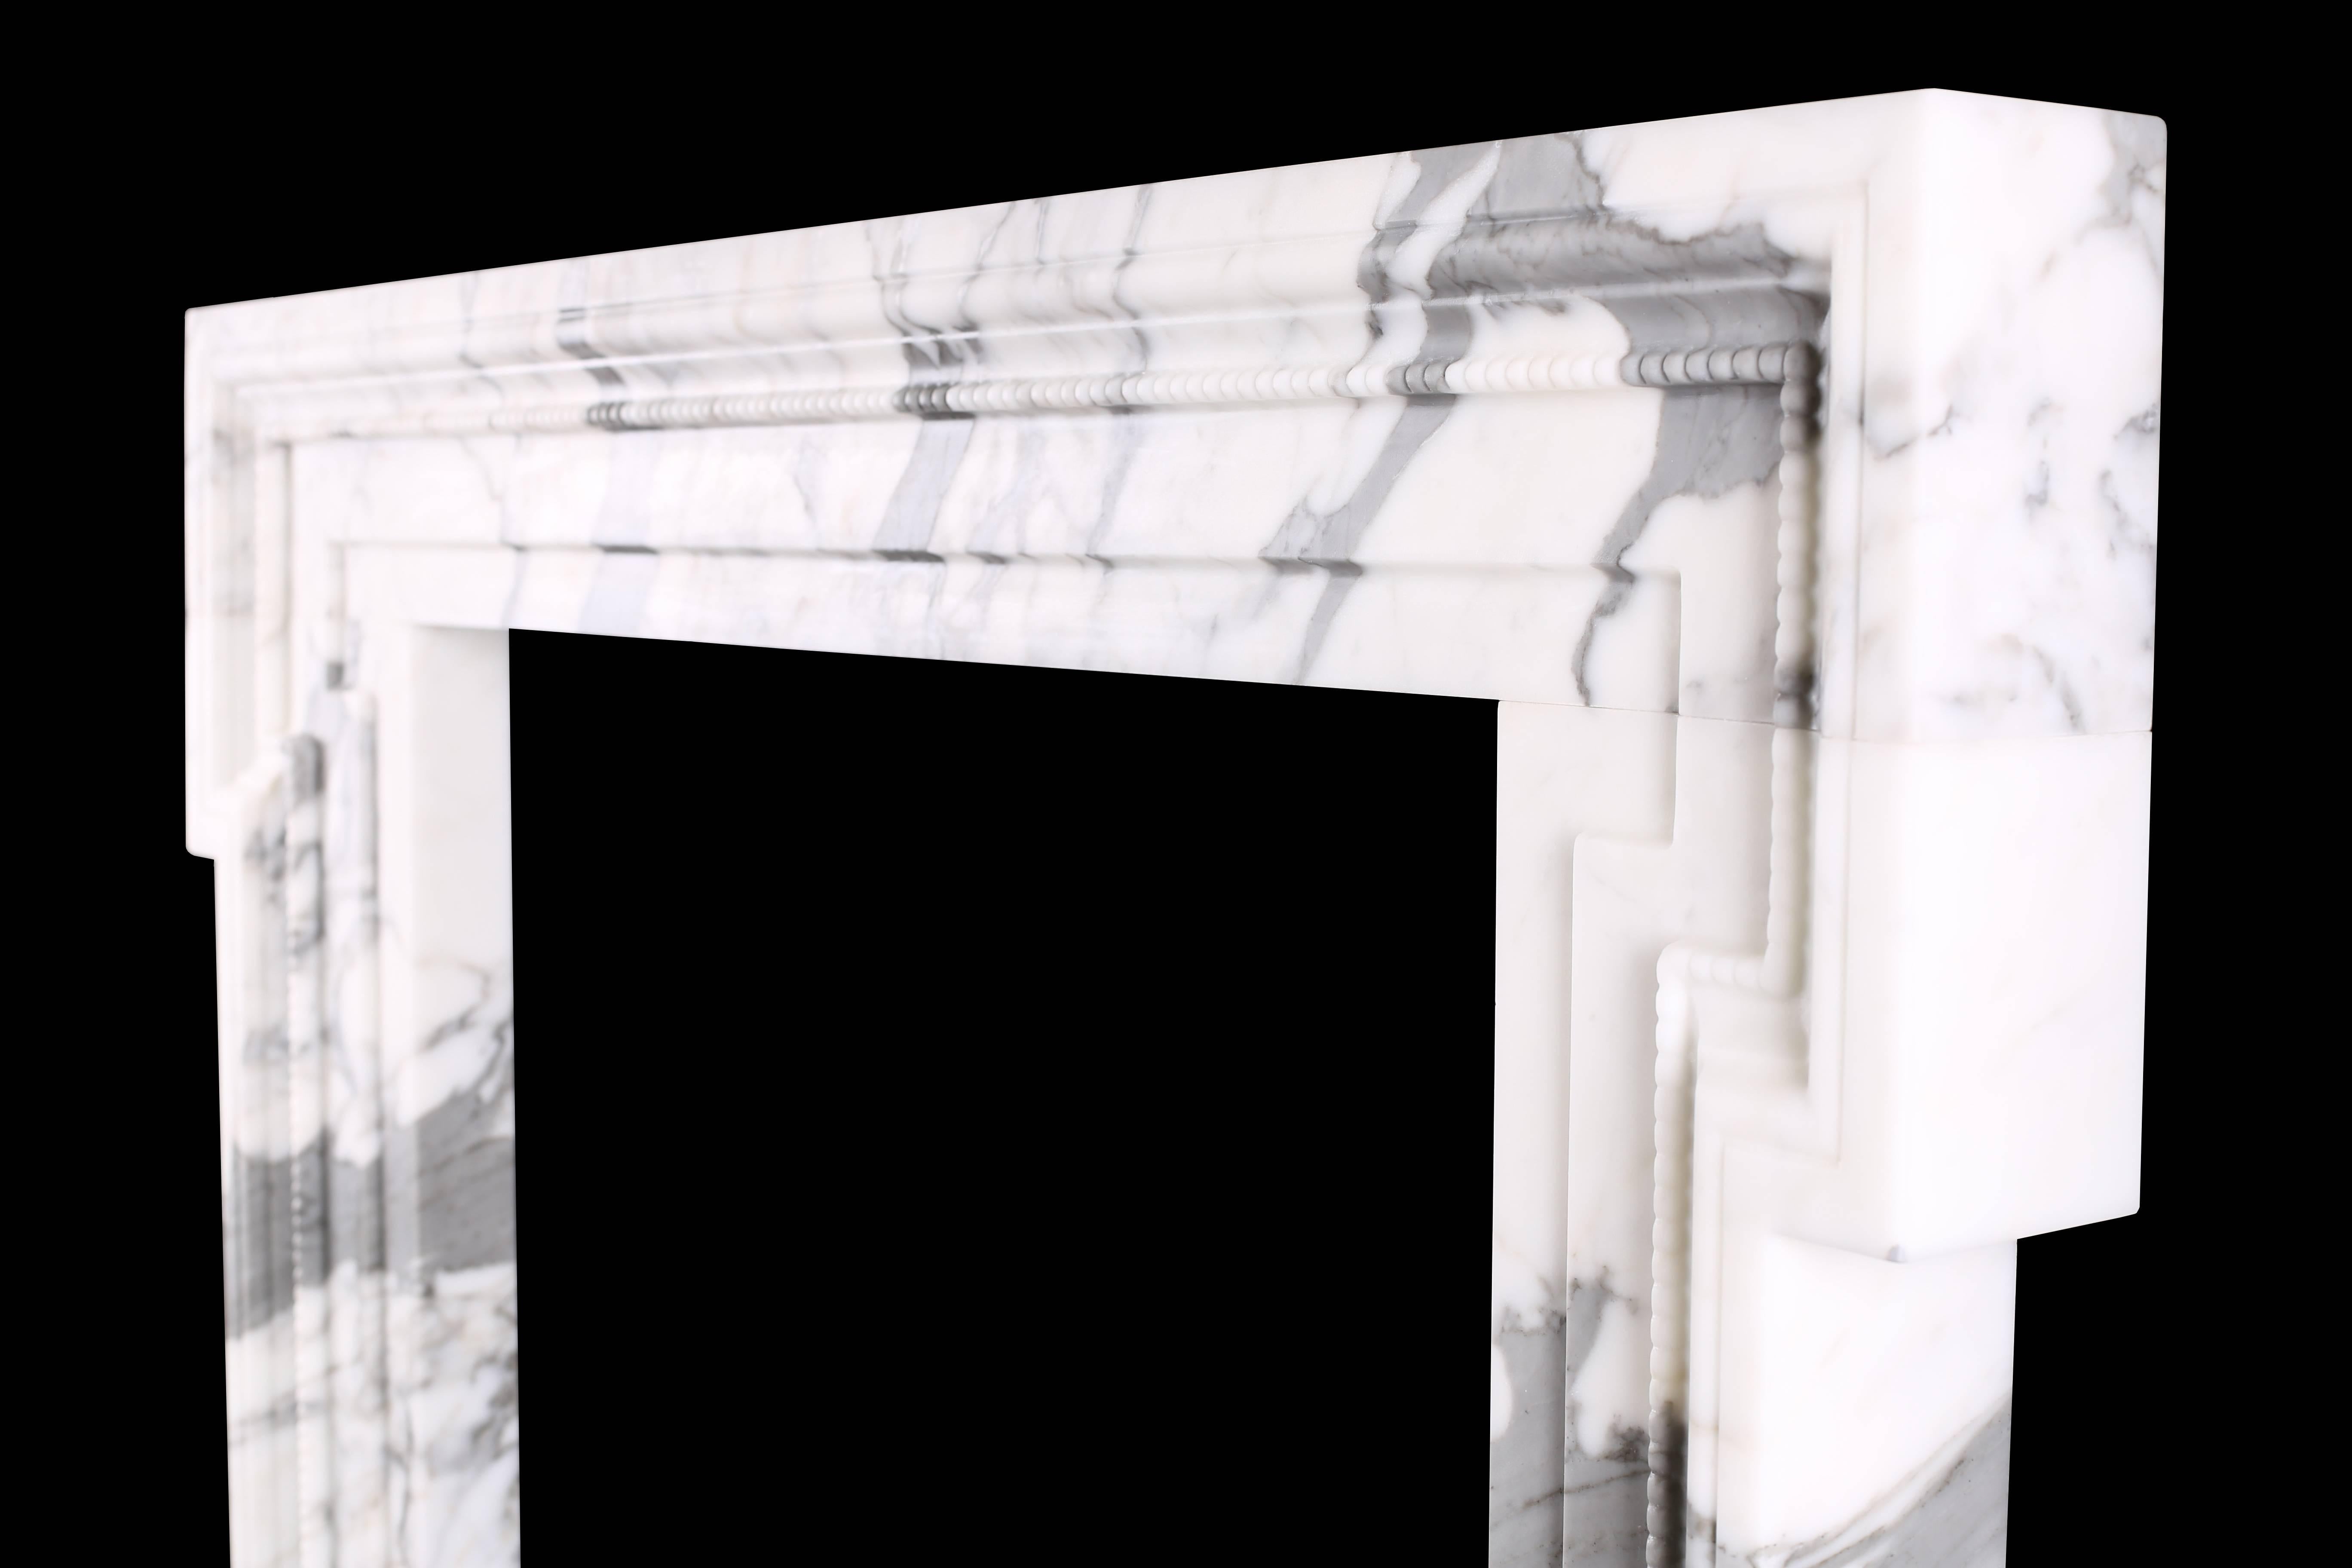 British Mid-18th Century Bolection Fireplace Mantel in Italian White Statuary Marble For Sale